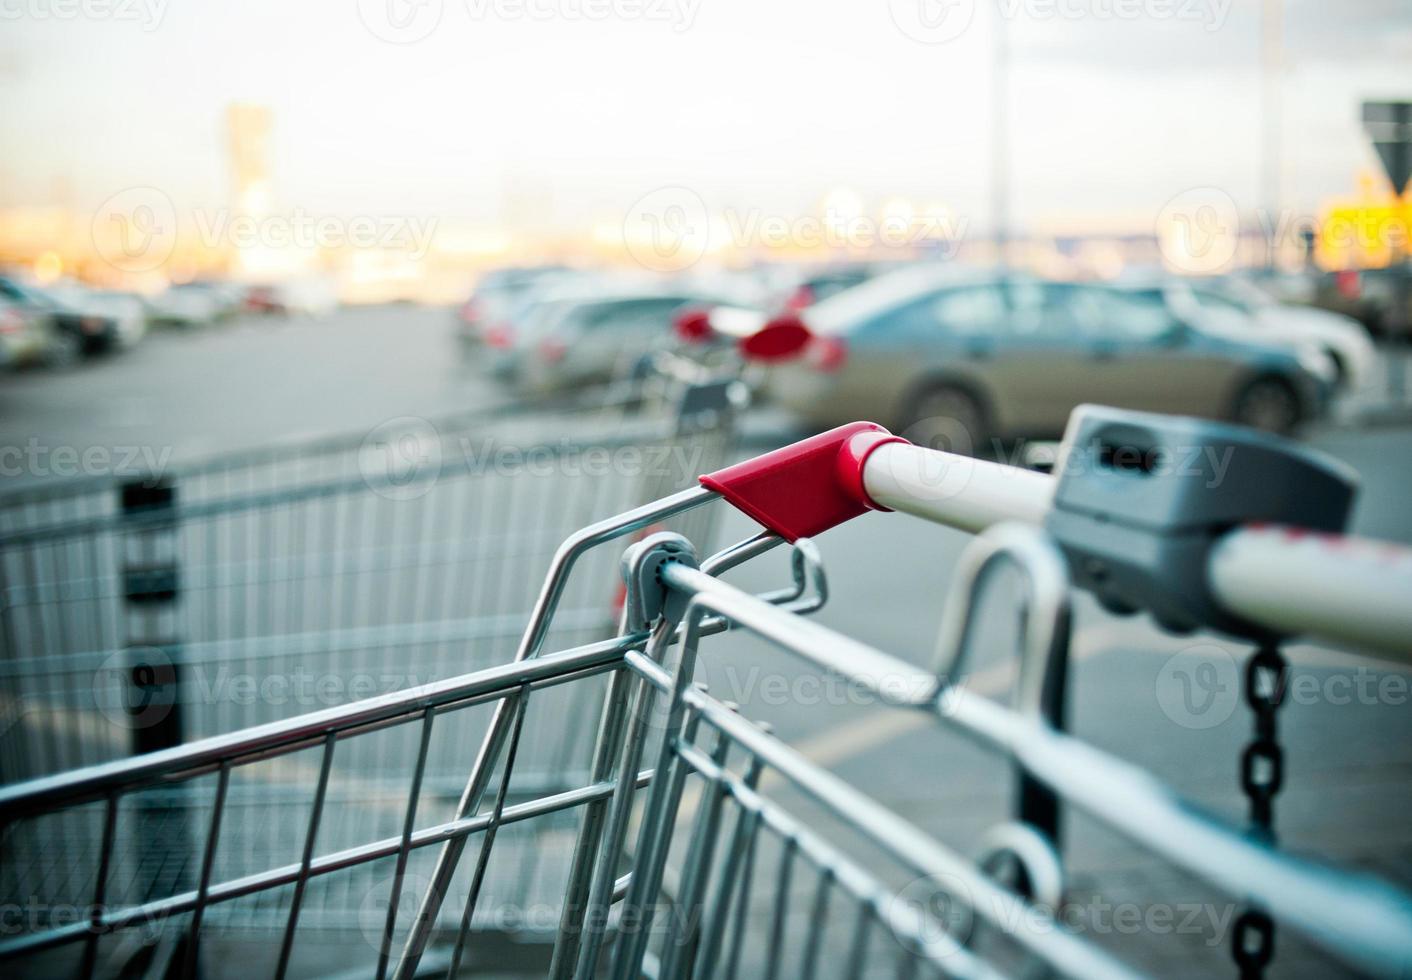 shopping carts near the shopping mall parking outddors photo